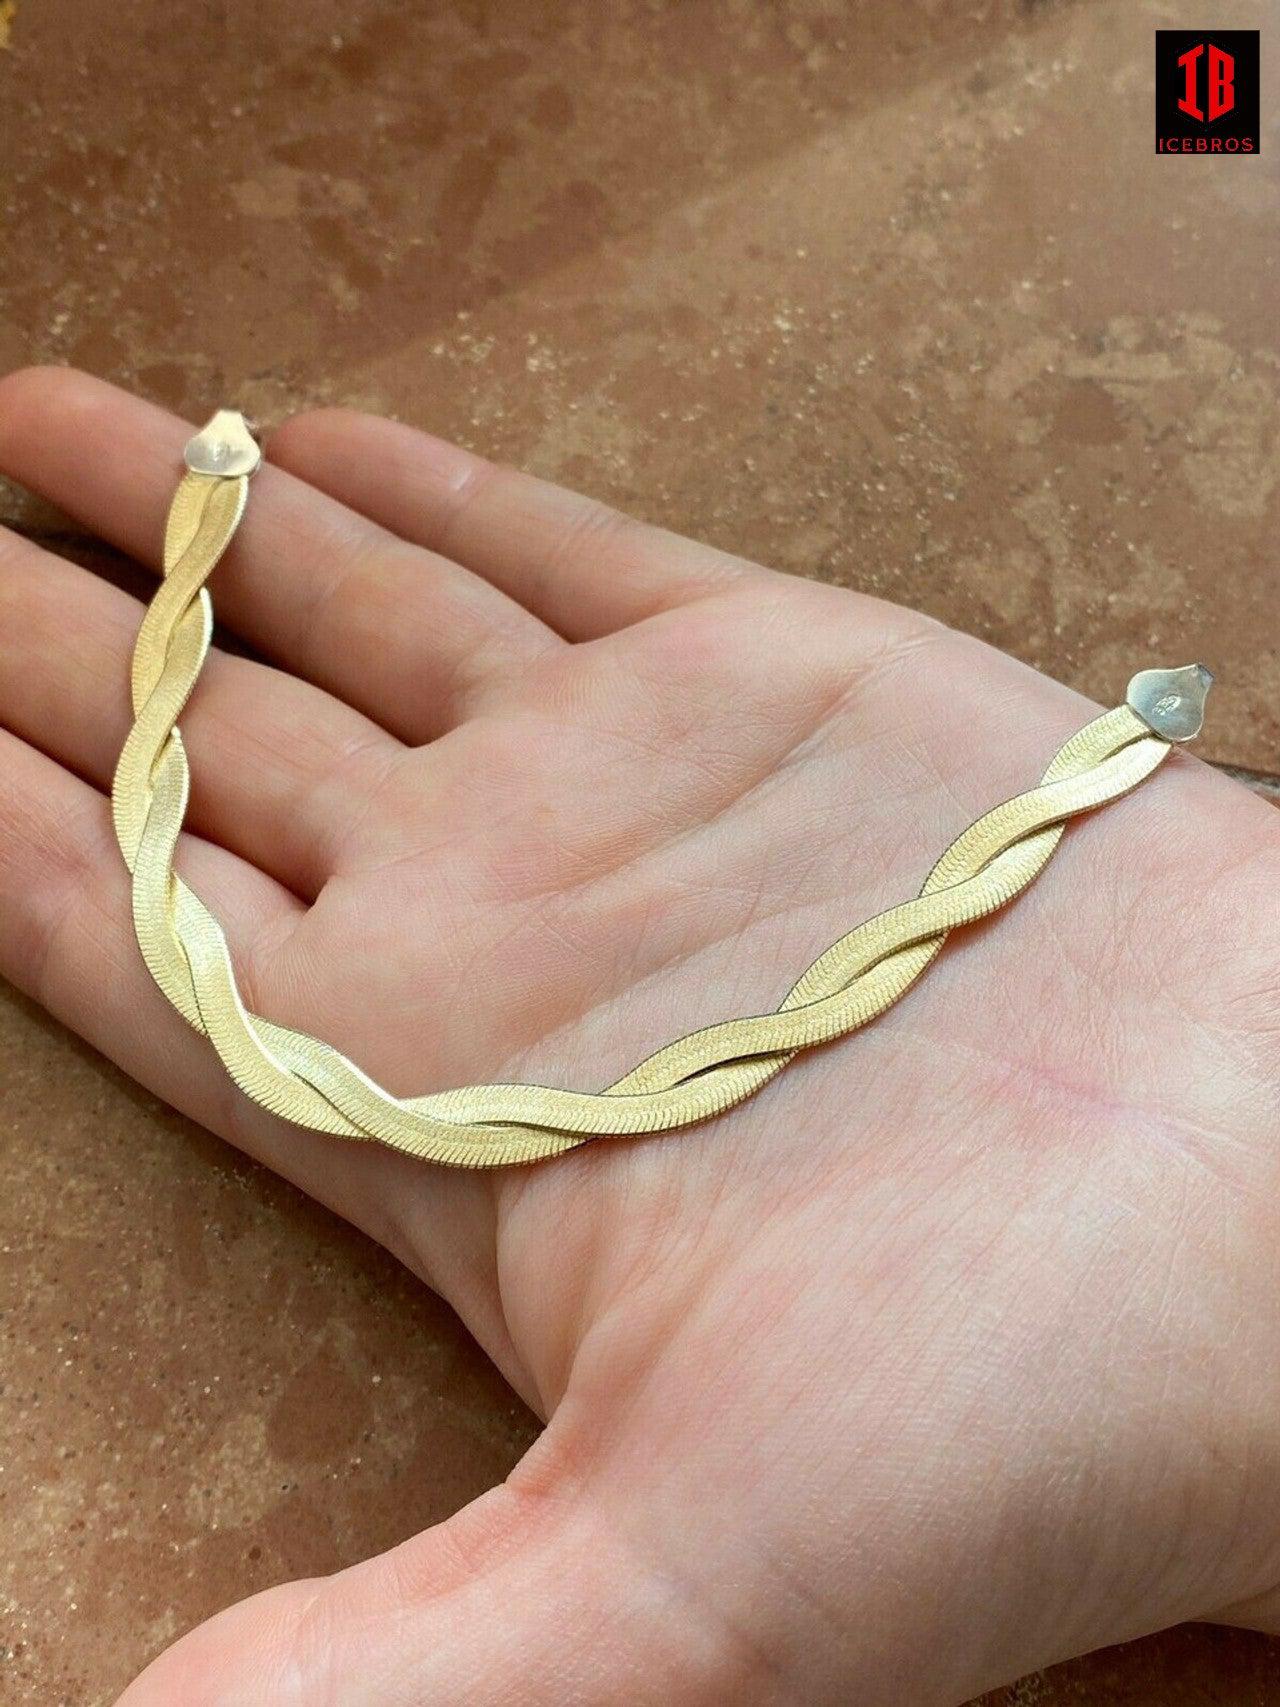 WHITE Gold Over Solid 925 Silver Twisted Braided Herringbone Bracelet 6" - 8.5"